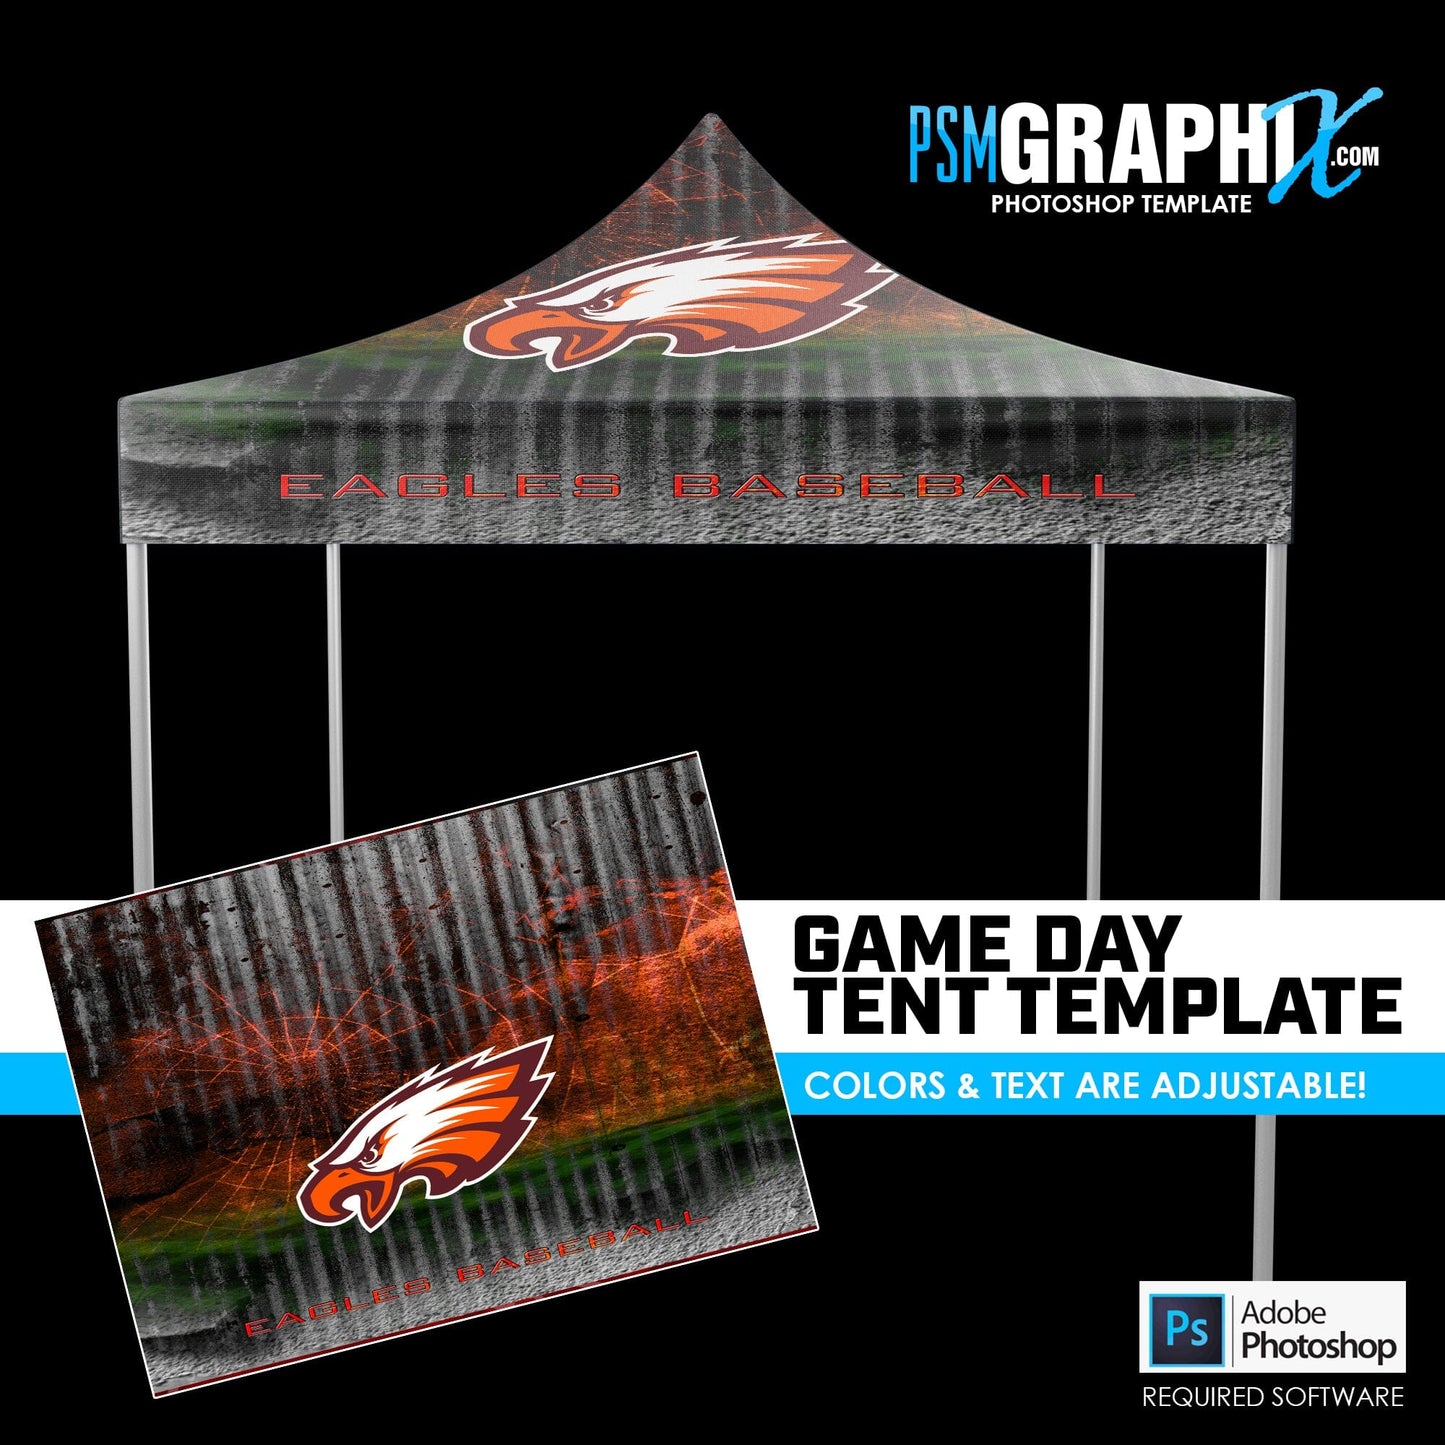 Steel Plate V.1 - Game Day Photoshop Tent Template-Photoshop Template - PSMGraphix